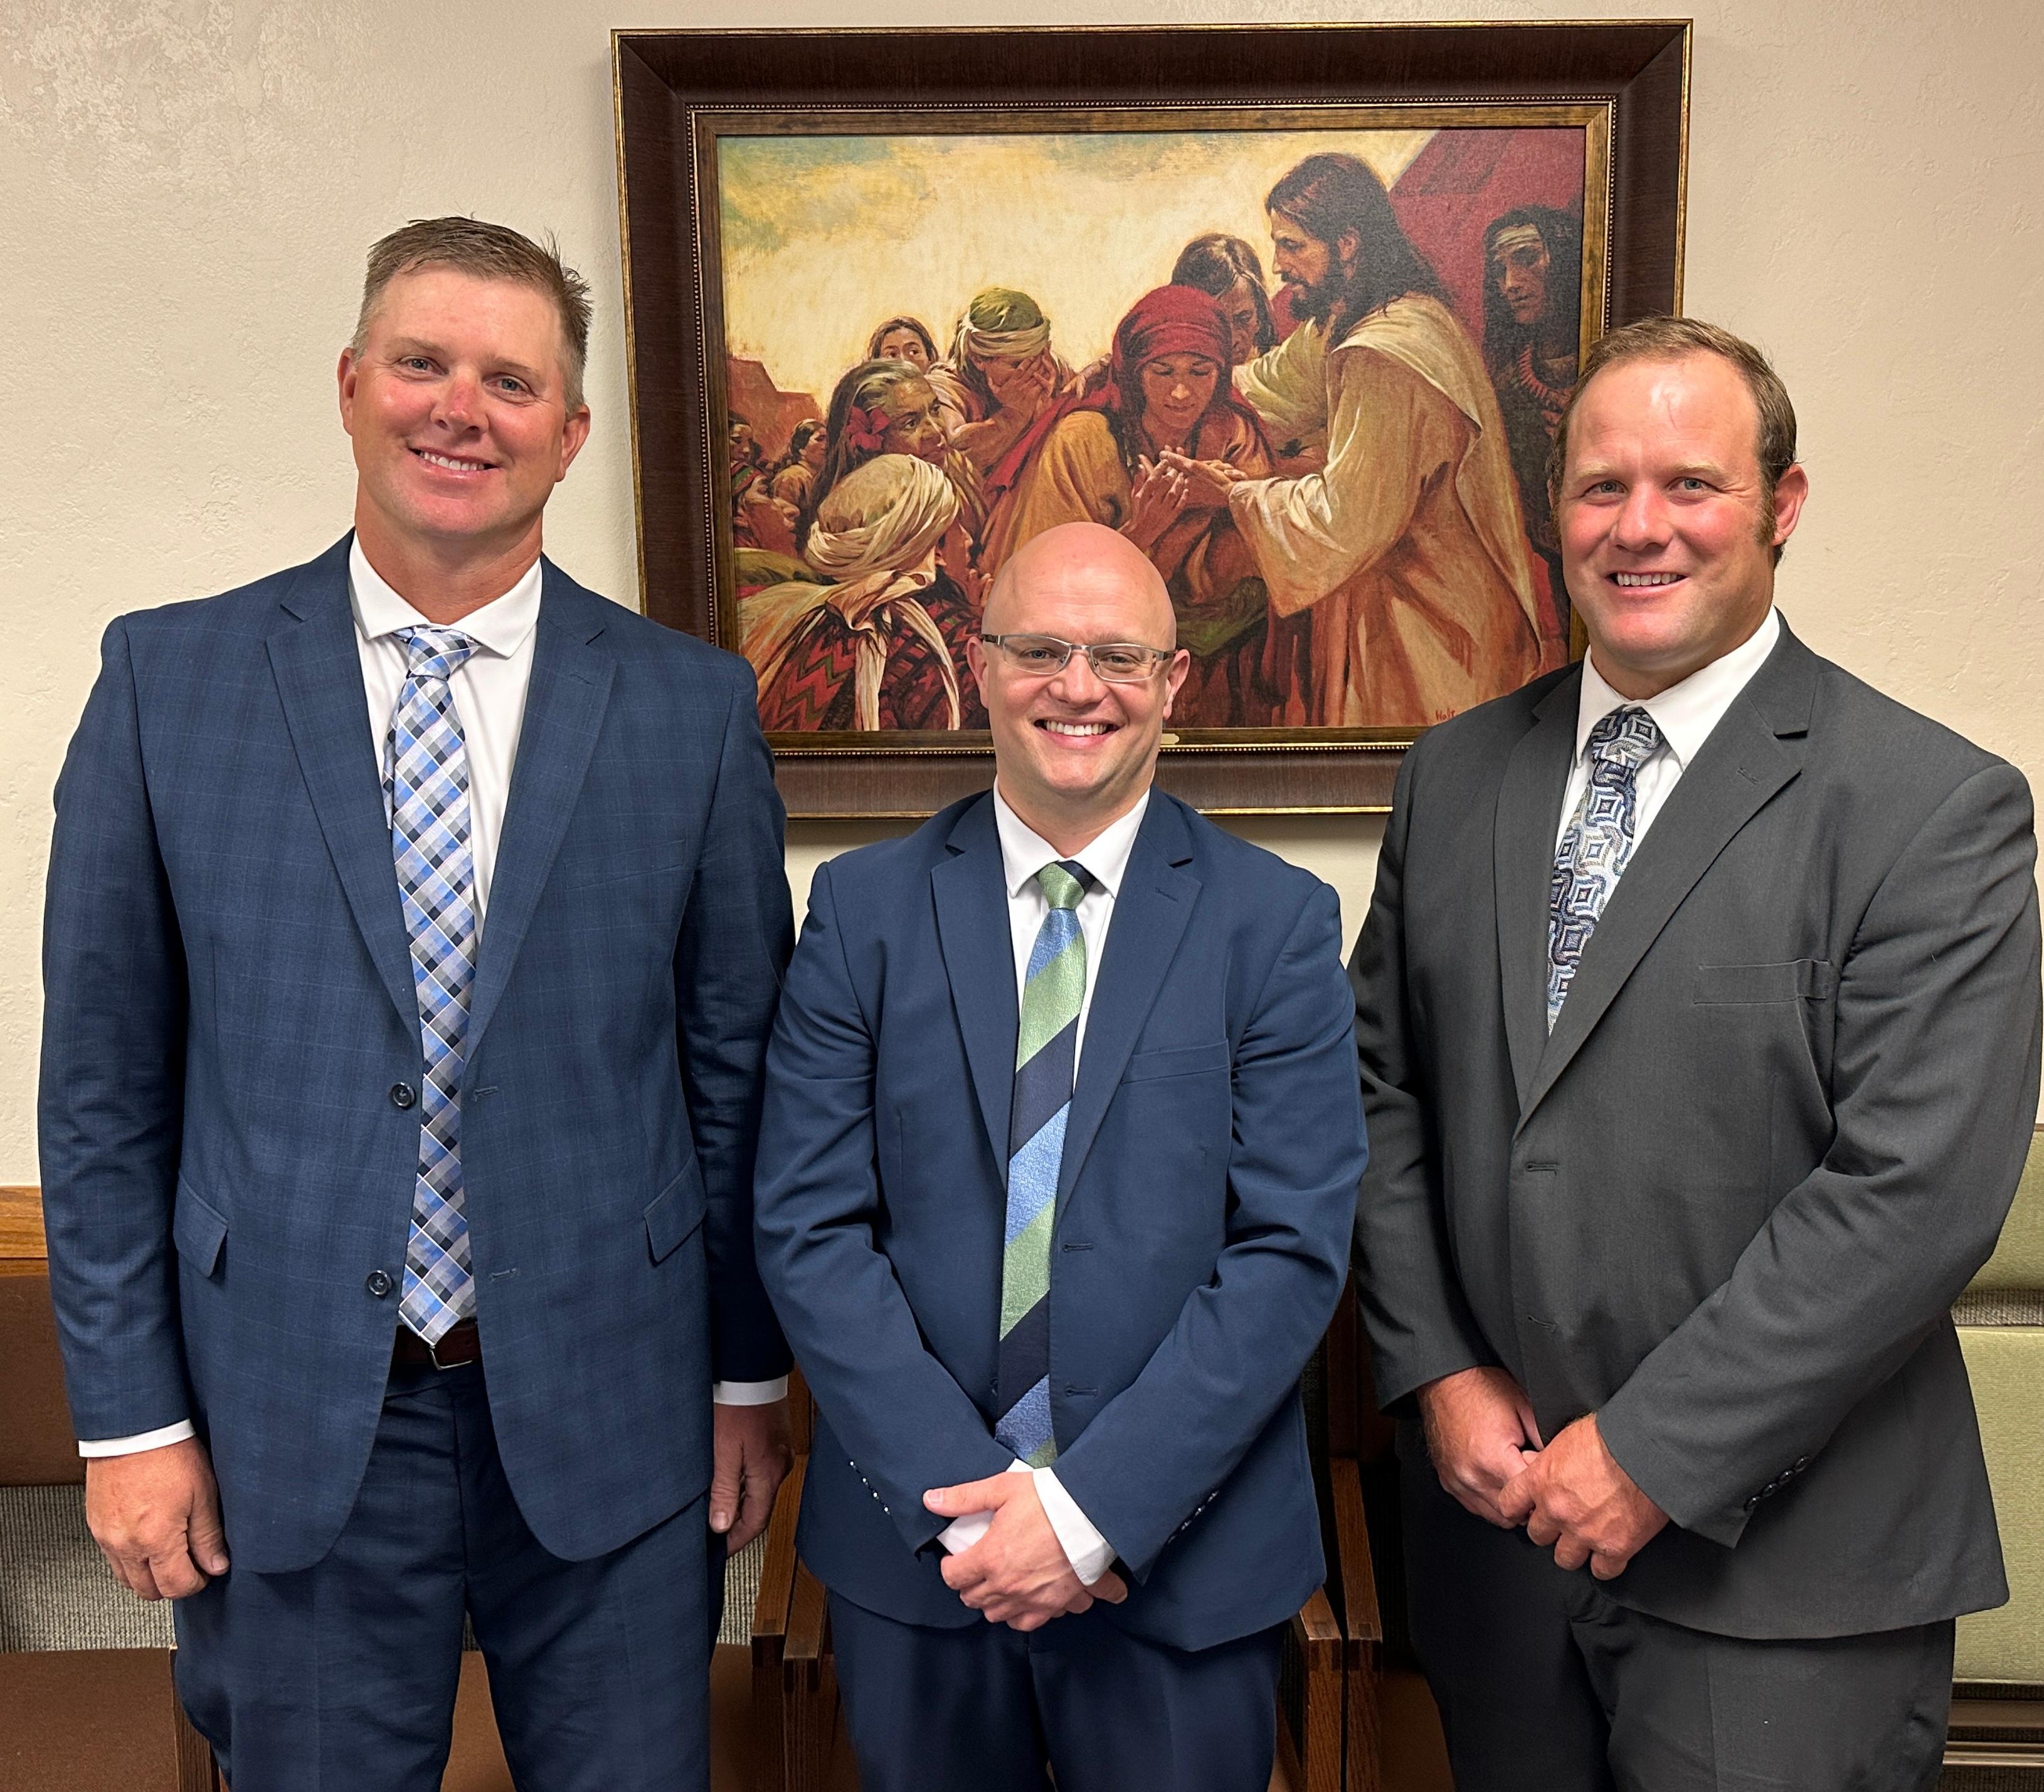 Grace First Ward Bishopric. 

Left: Nick Johnson, First Counselor

Middle: Drew Wright, Bishop

Right: Travis Krebs, Second Counselor

The bishopric leads the congregation in all spiritual and administrative matters. Please feel welcome to say hi and introduce yourself when you come!

For questions on meeting times for each congregation, please call 208-417-1813.